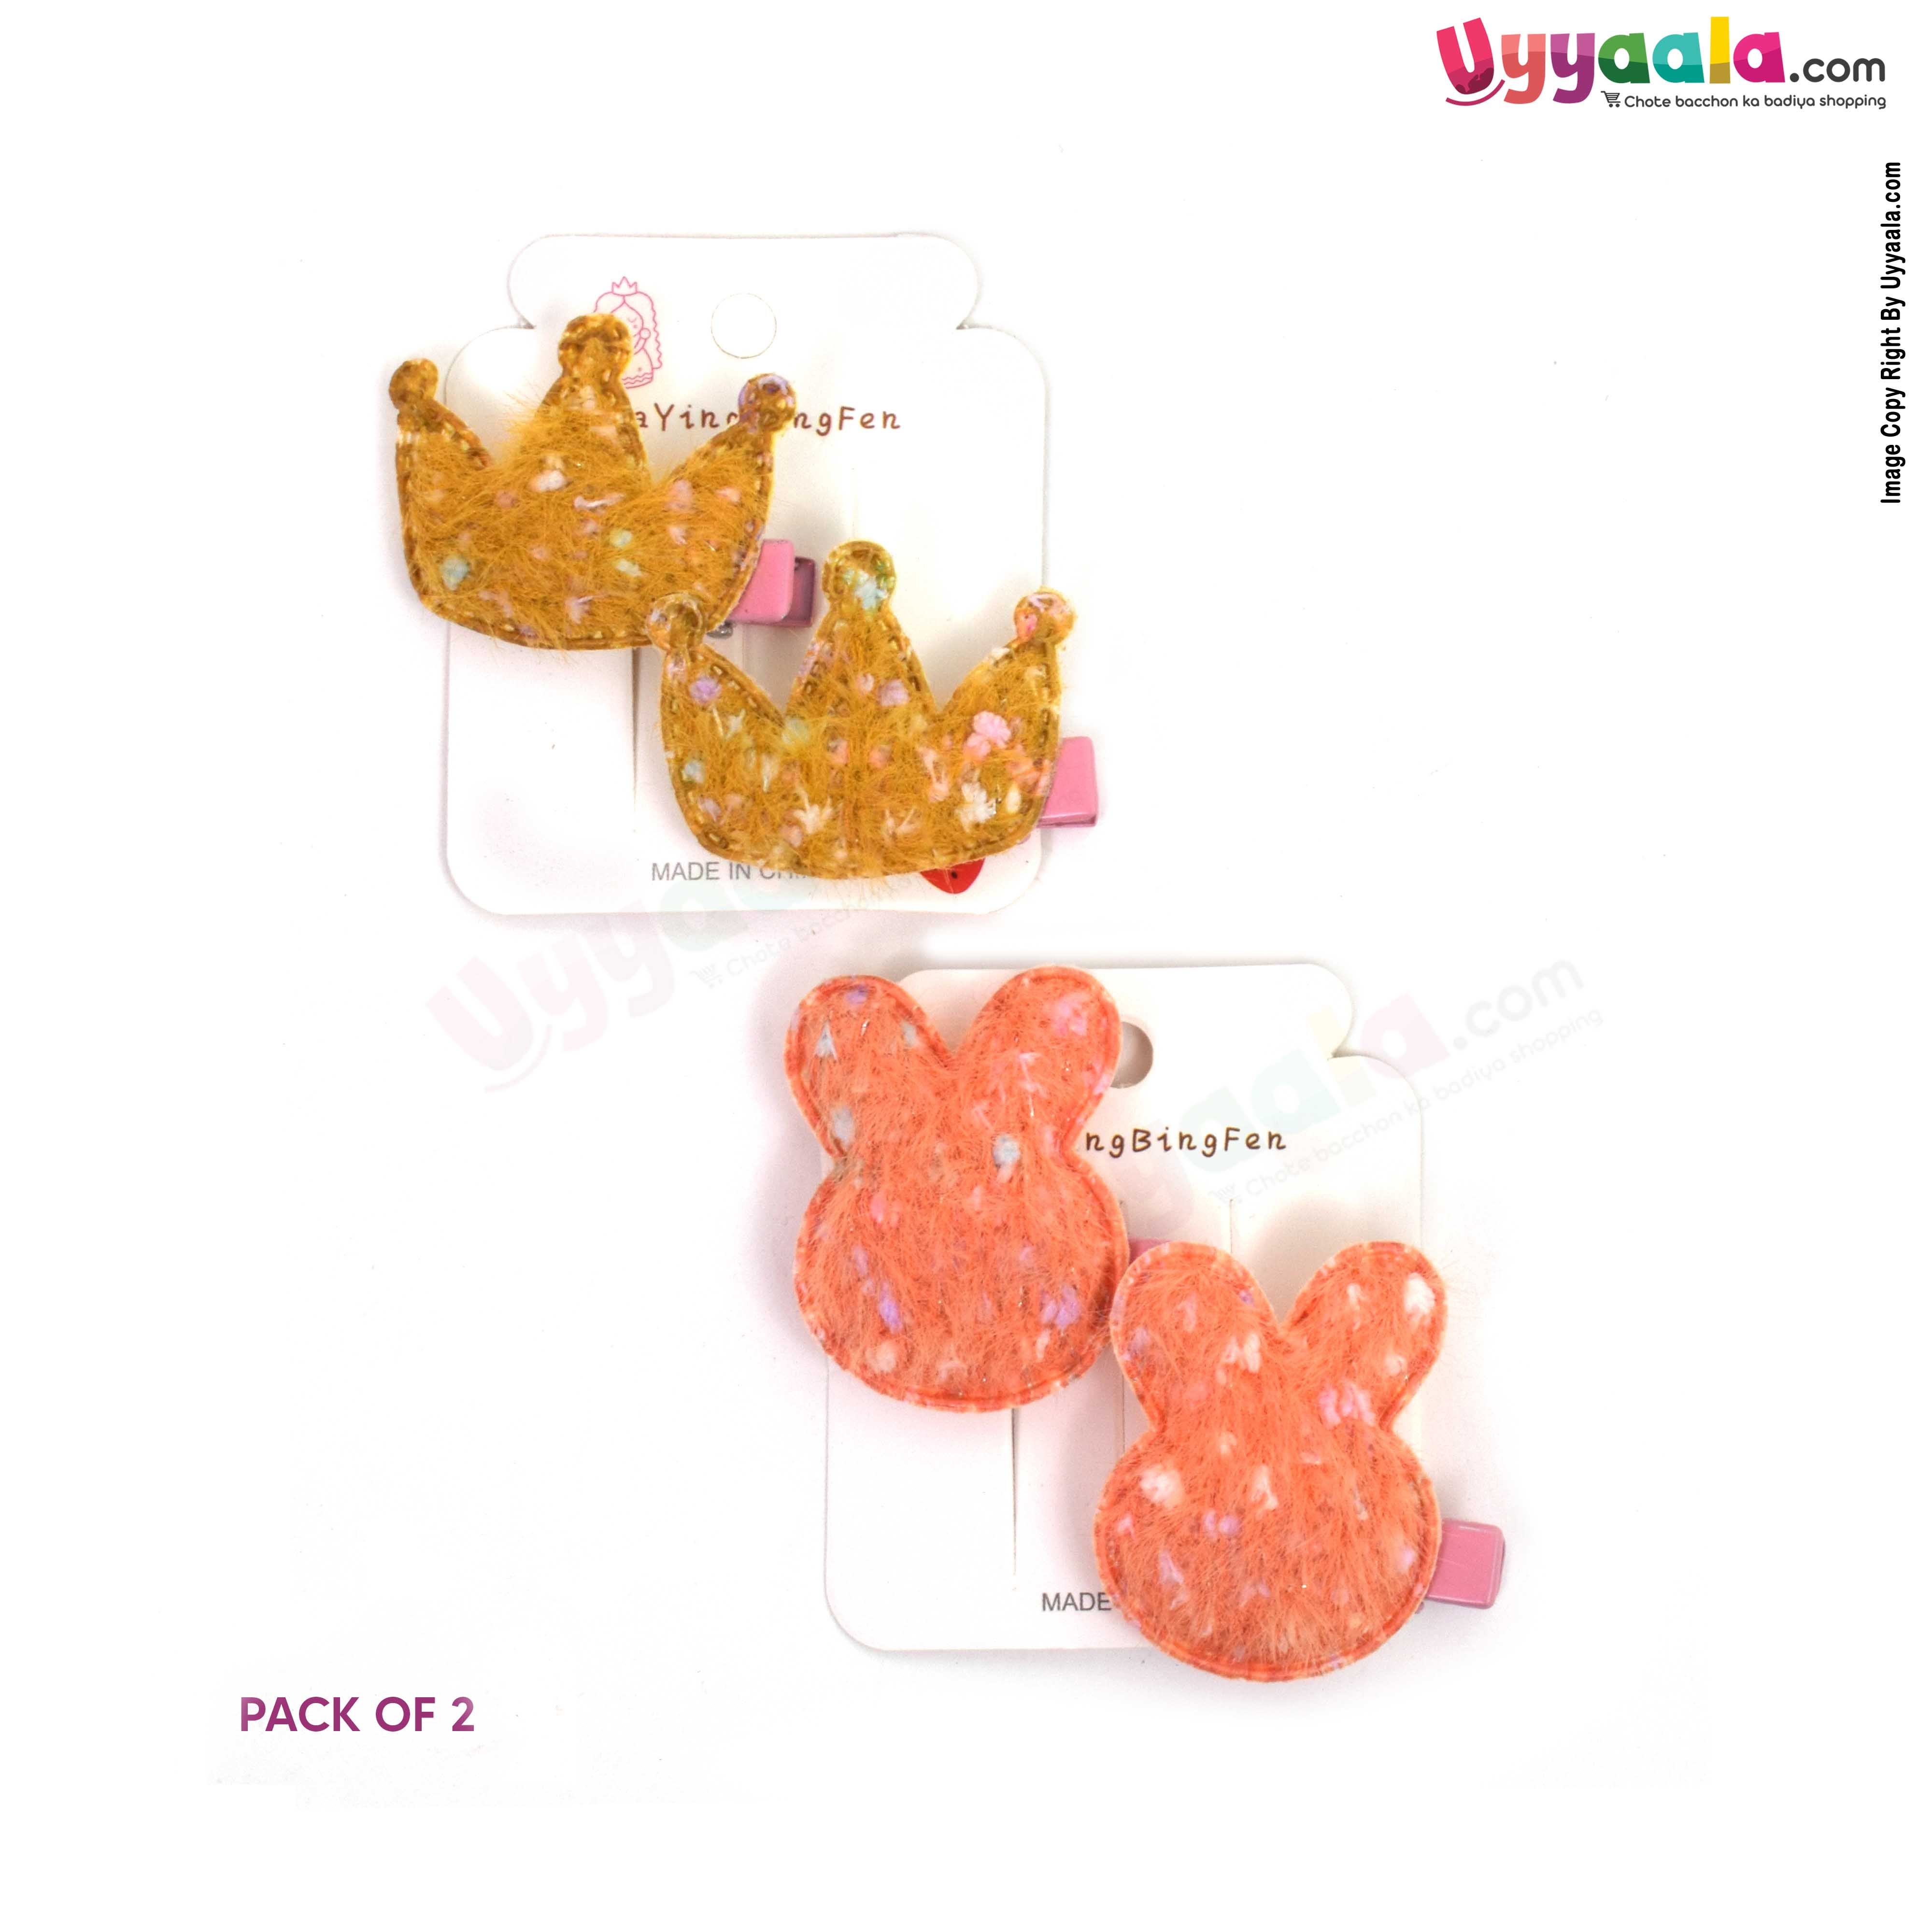 Crown & bunny hair clip set for babies & girls, Pack of 2 - yellow & peach, 6 + months